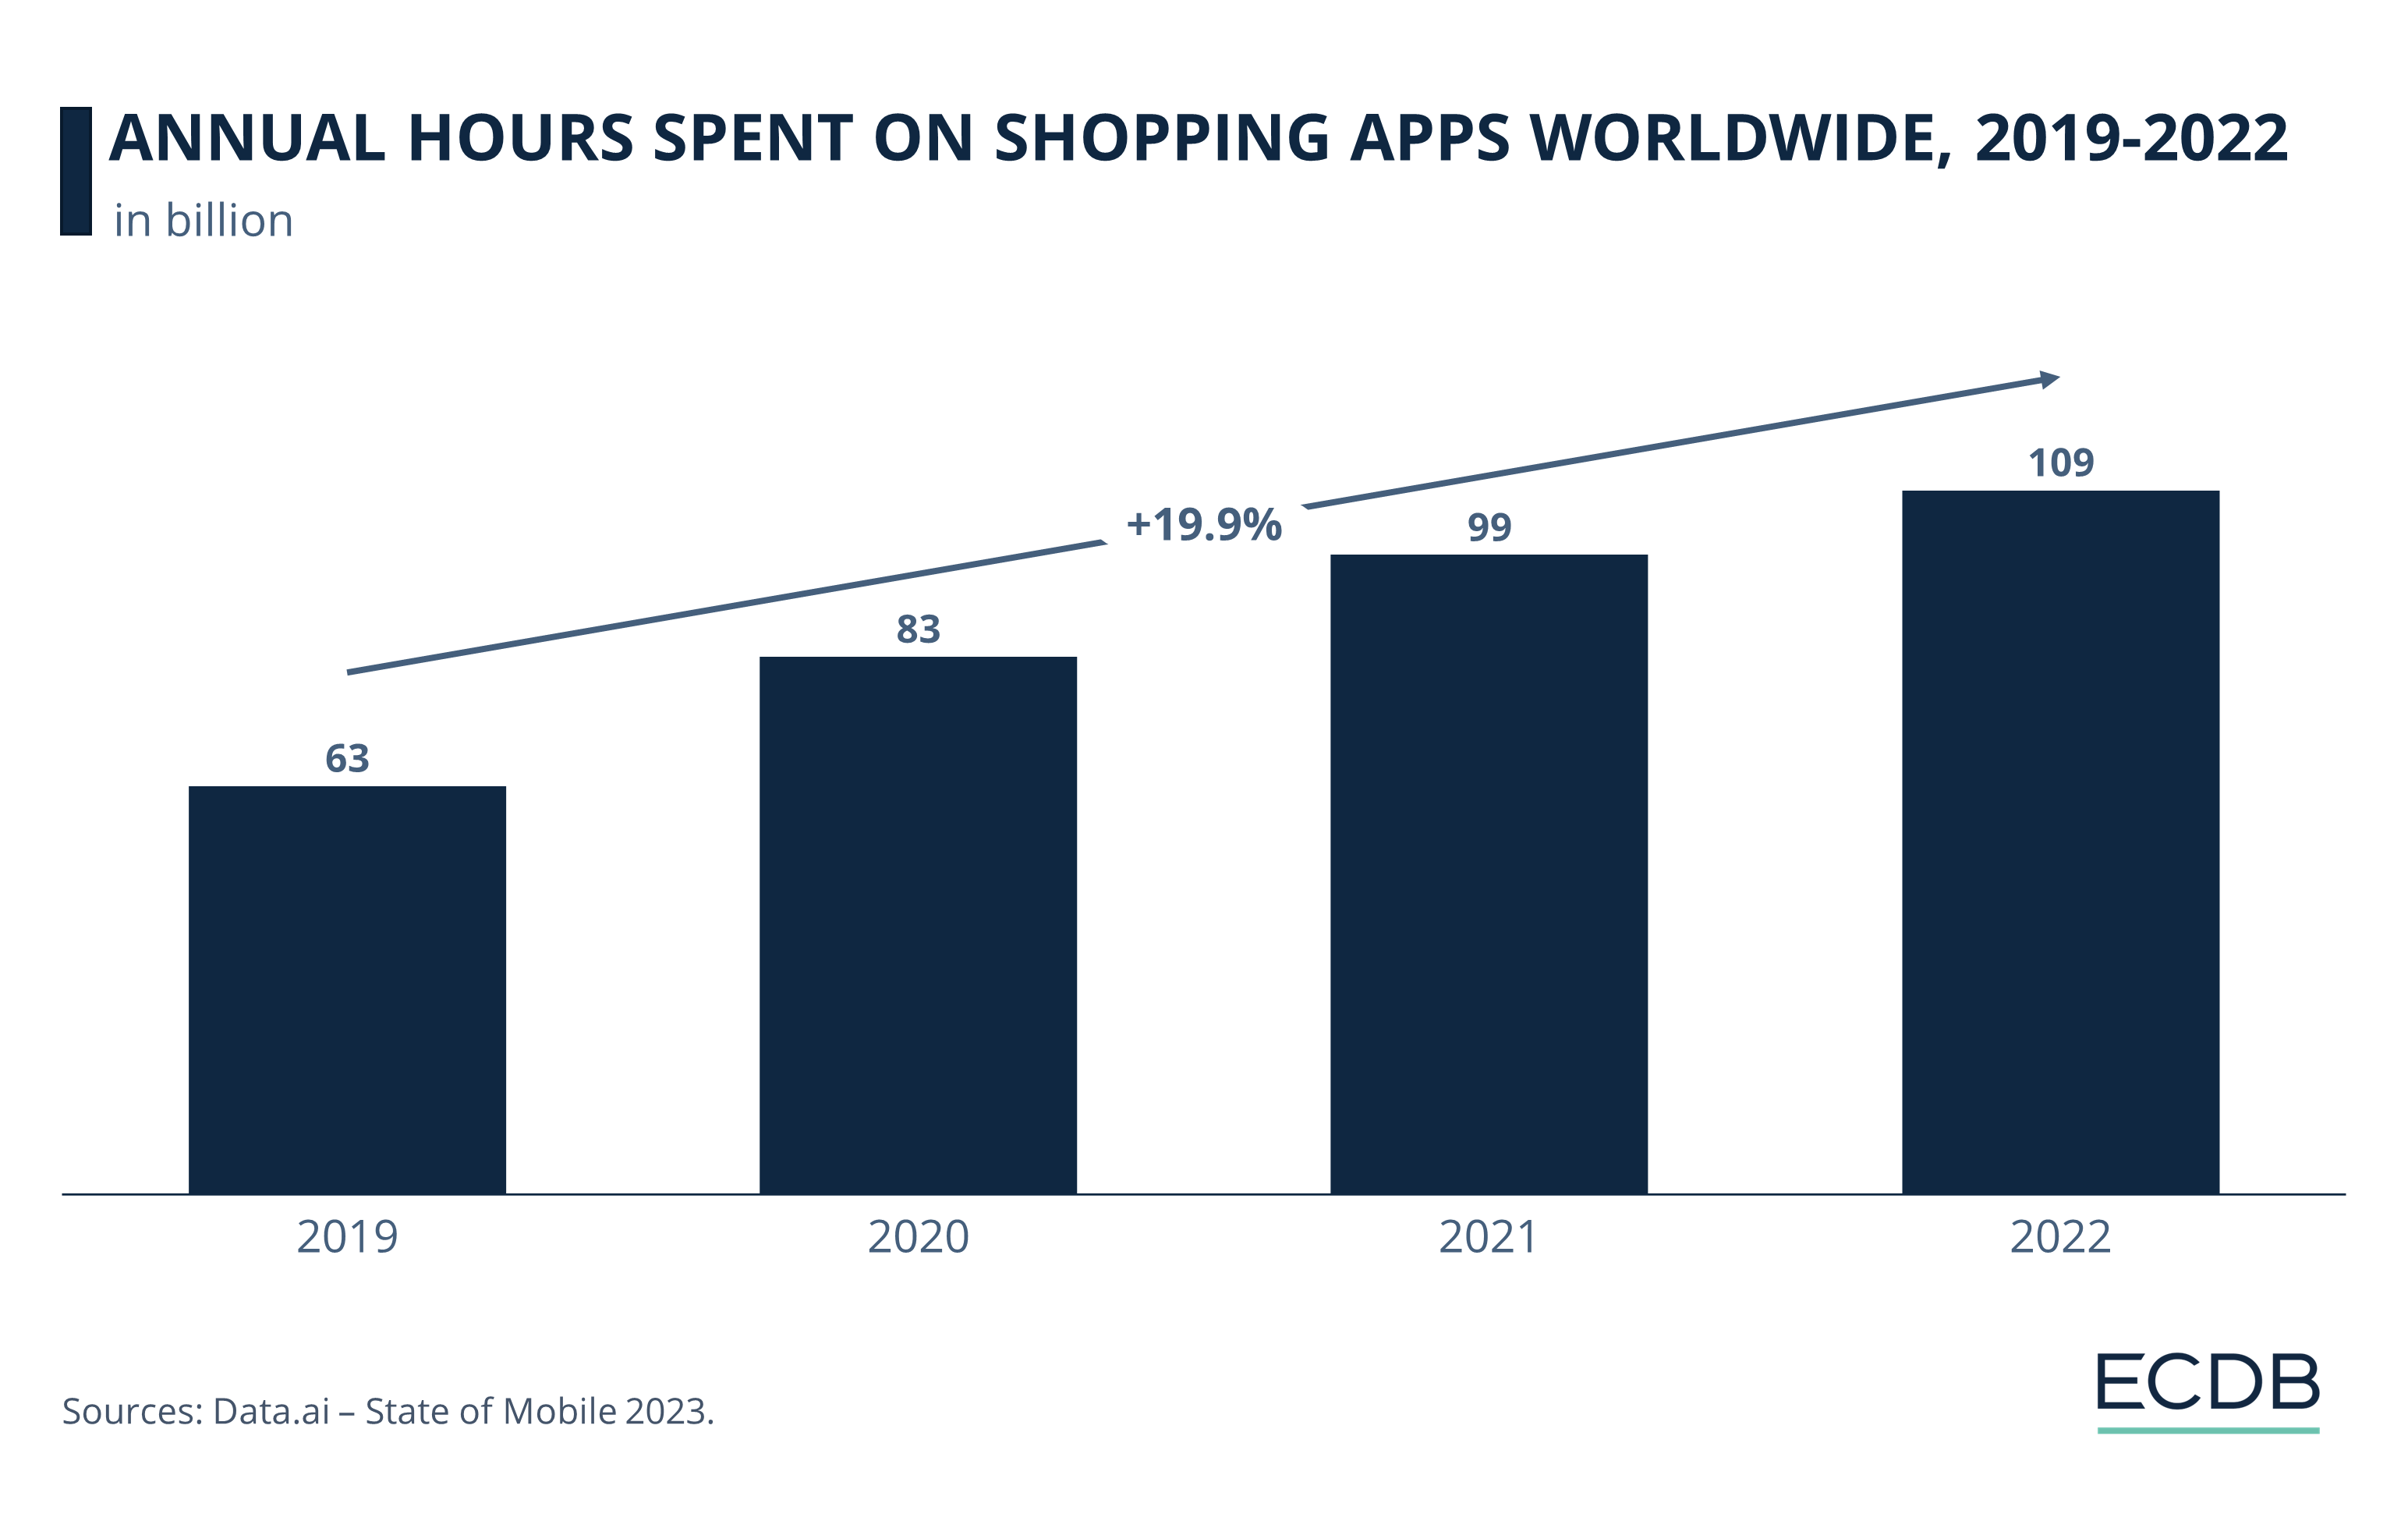 Annual Hours Spent on Shopping Apps Worldwide, 2019-2022